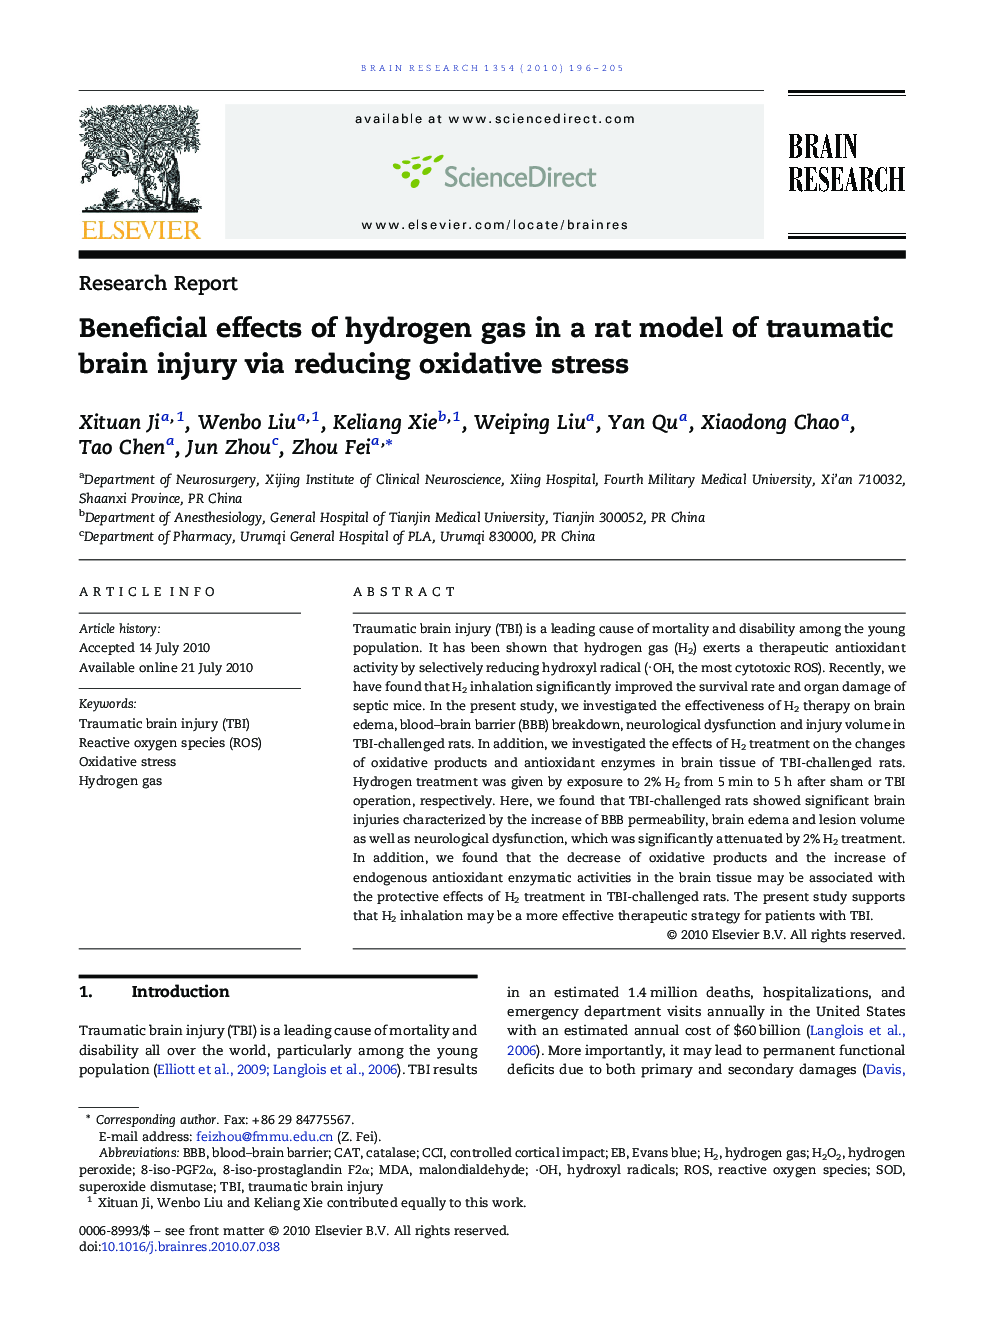 Beneficial effects of hydrogen gas in a rat model of traumatic brain injury via reducing oxidative stress